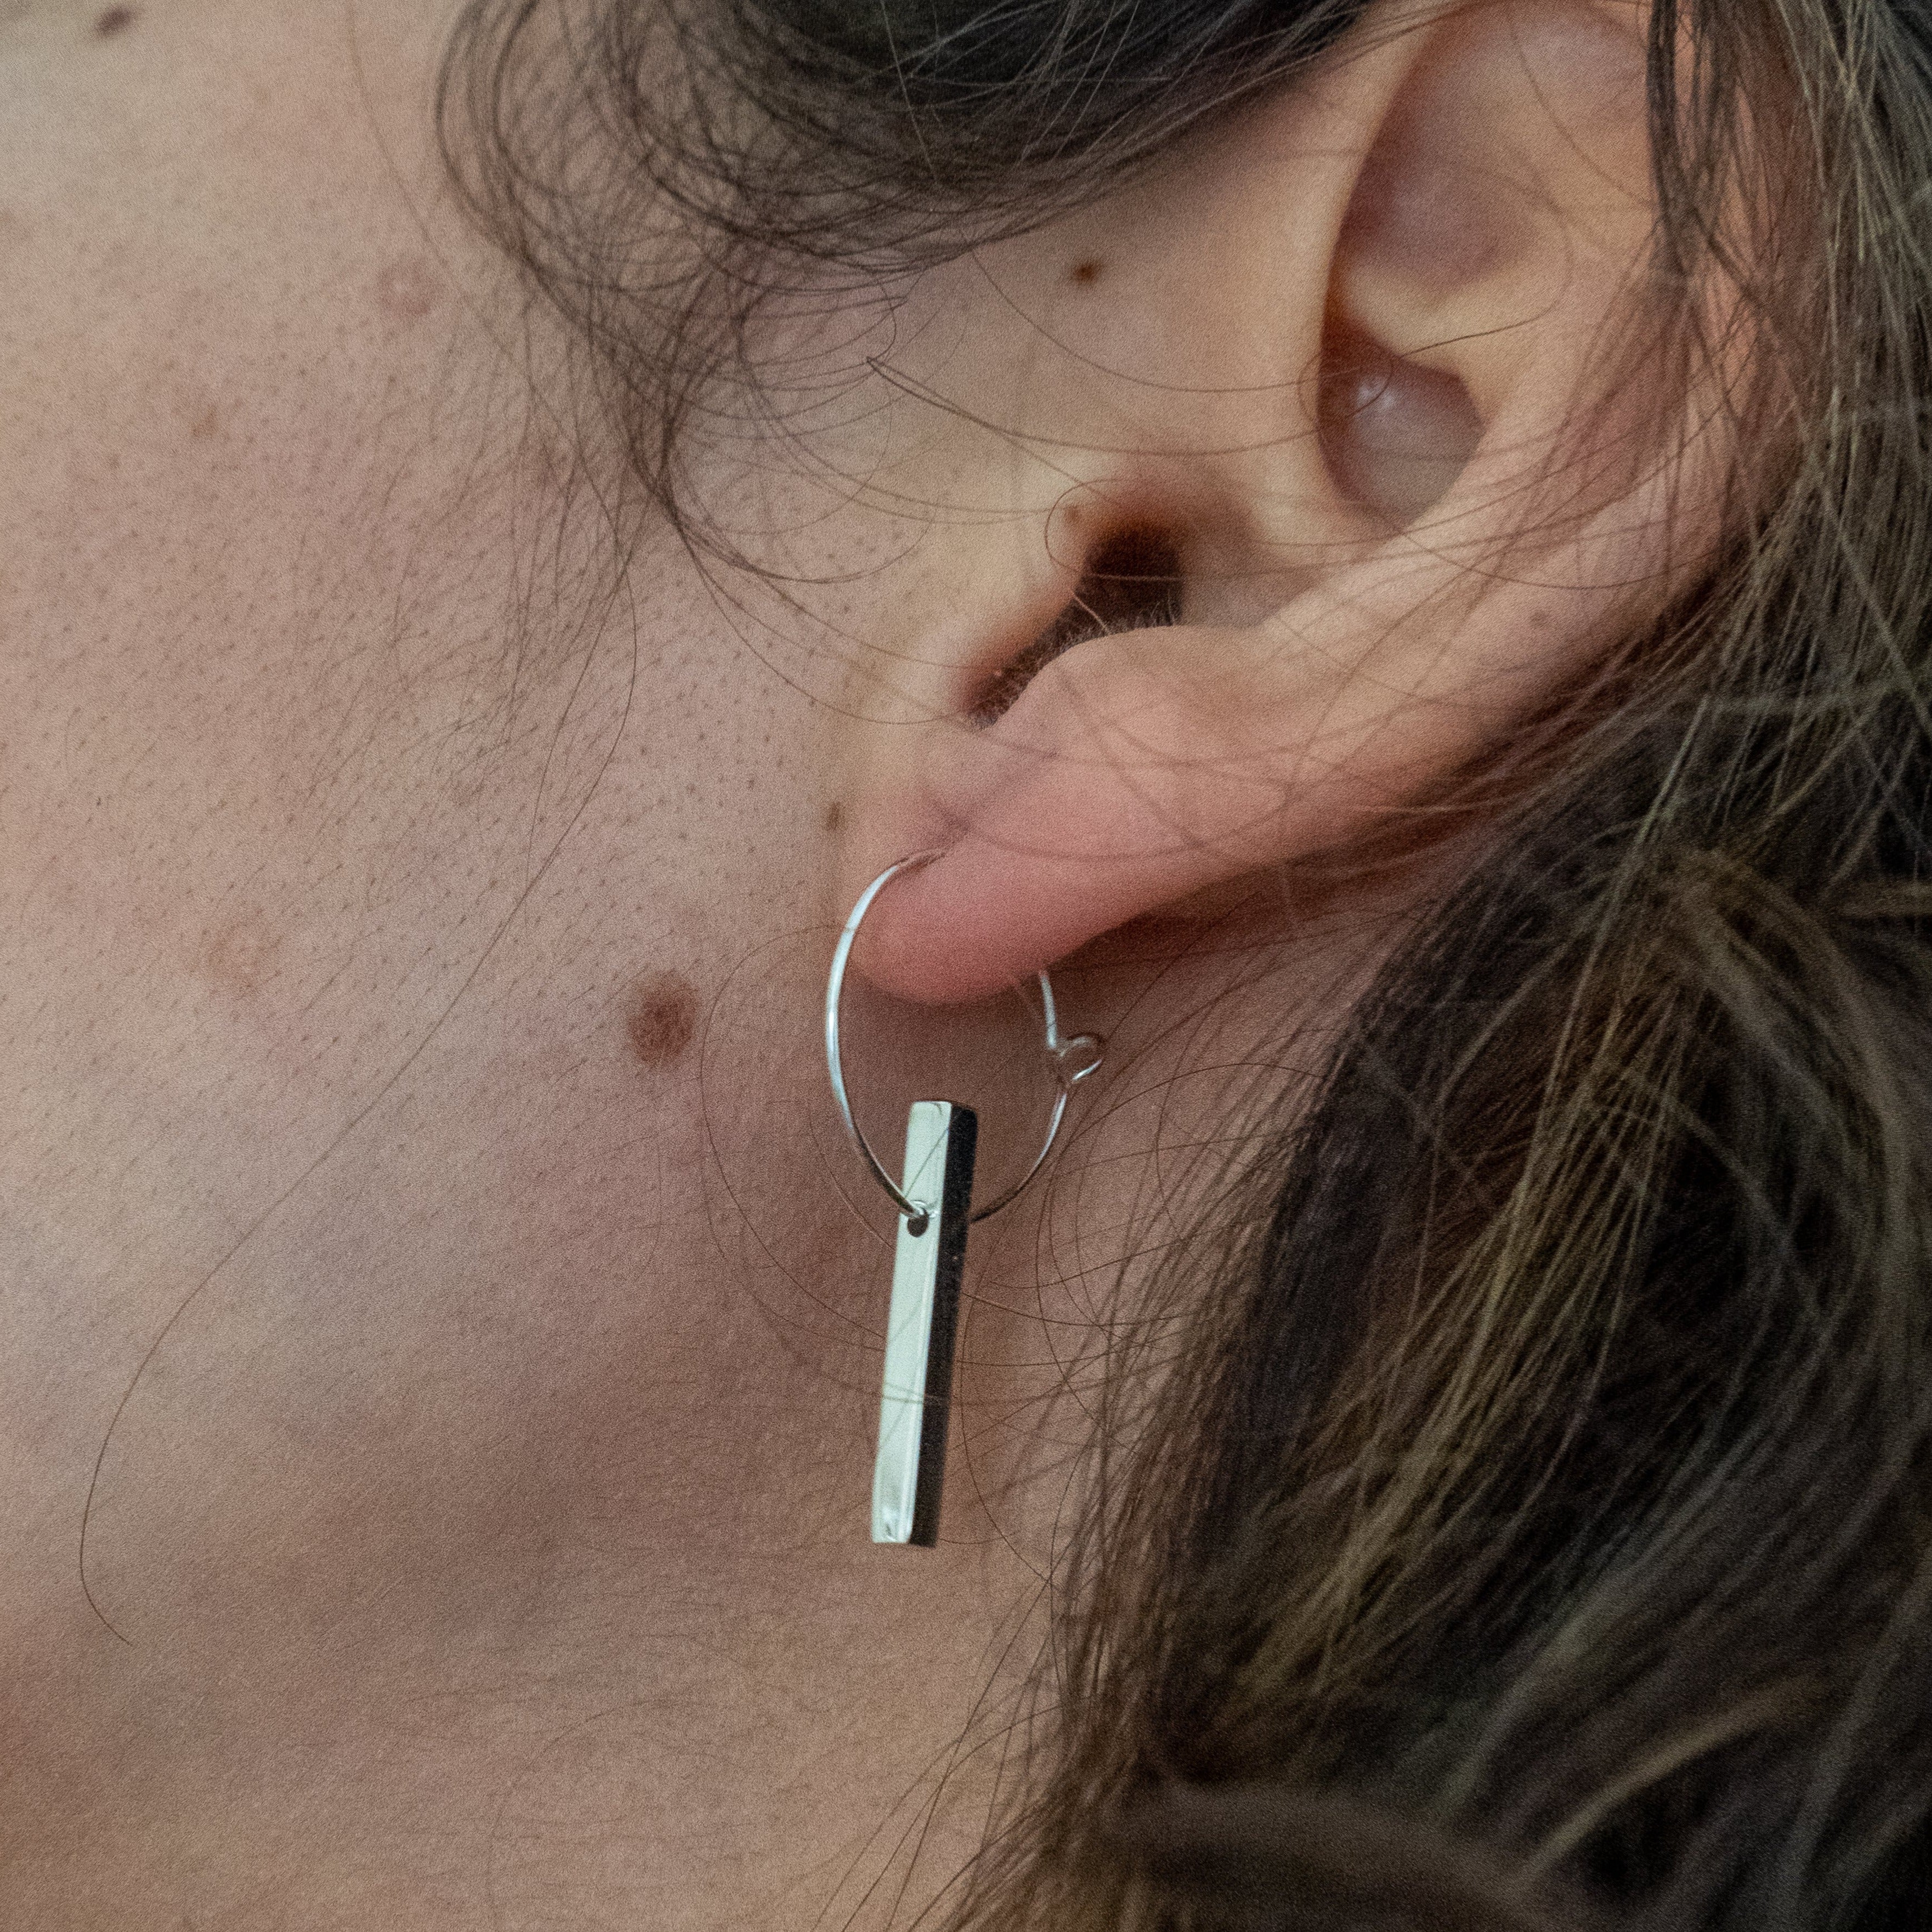 The Minimalist Scandinavian Ray earrings by MeganCollinsJewellery with the delicate circle and bar, are an abstract representation of the sun. Wear them as a reminder to shine your inner light.